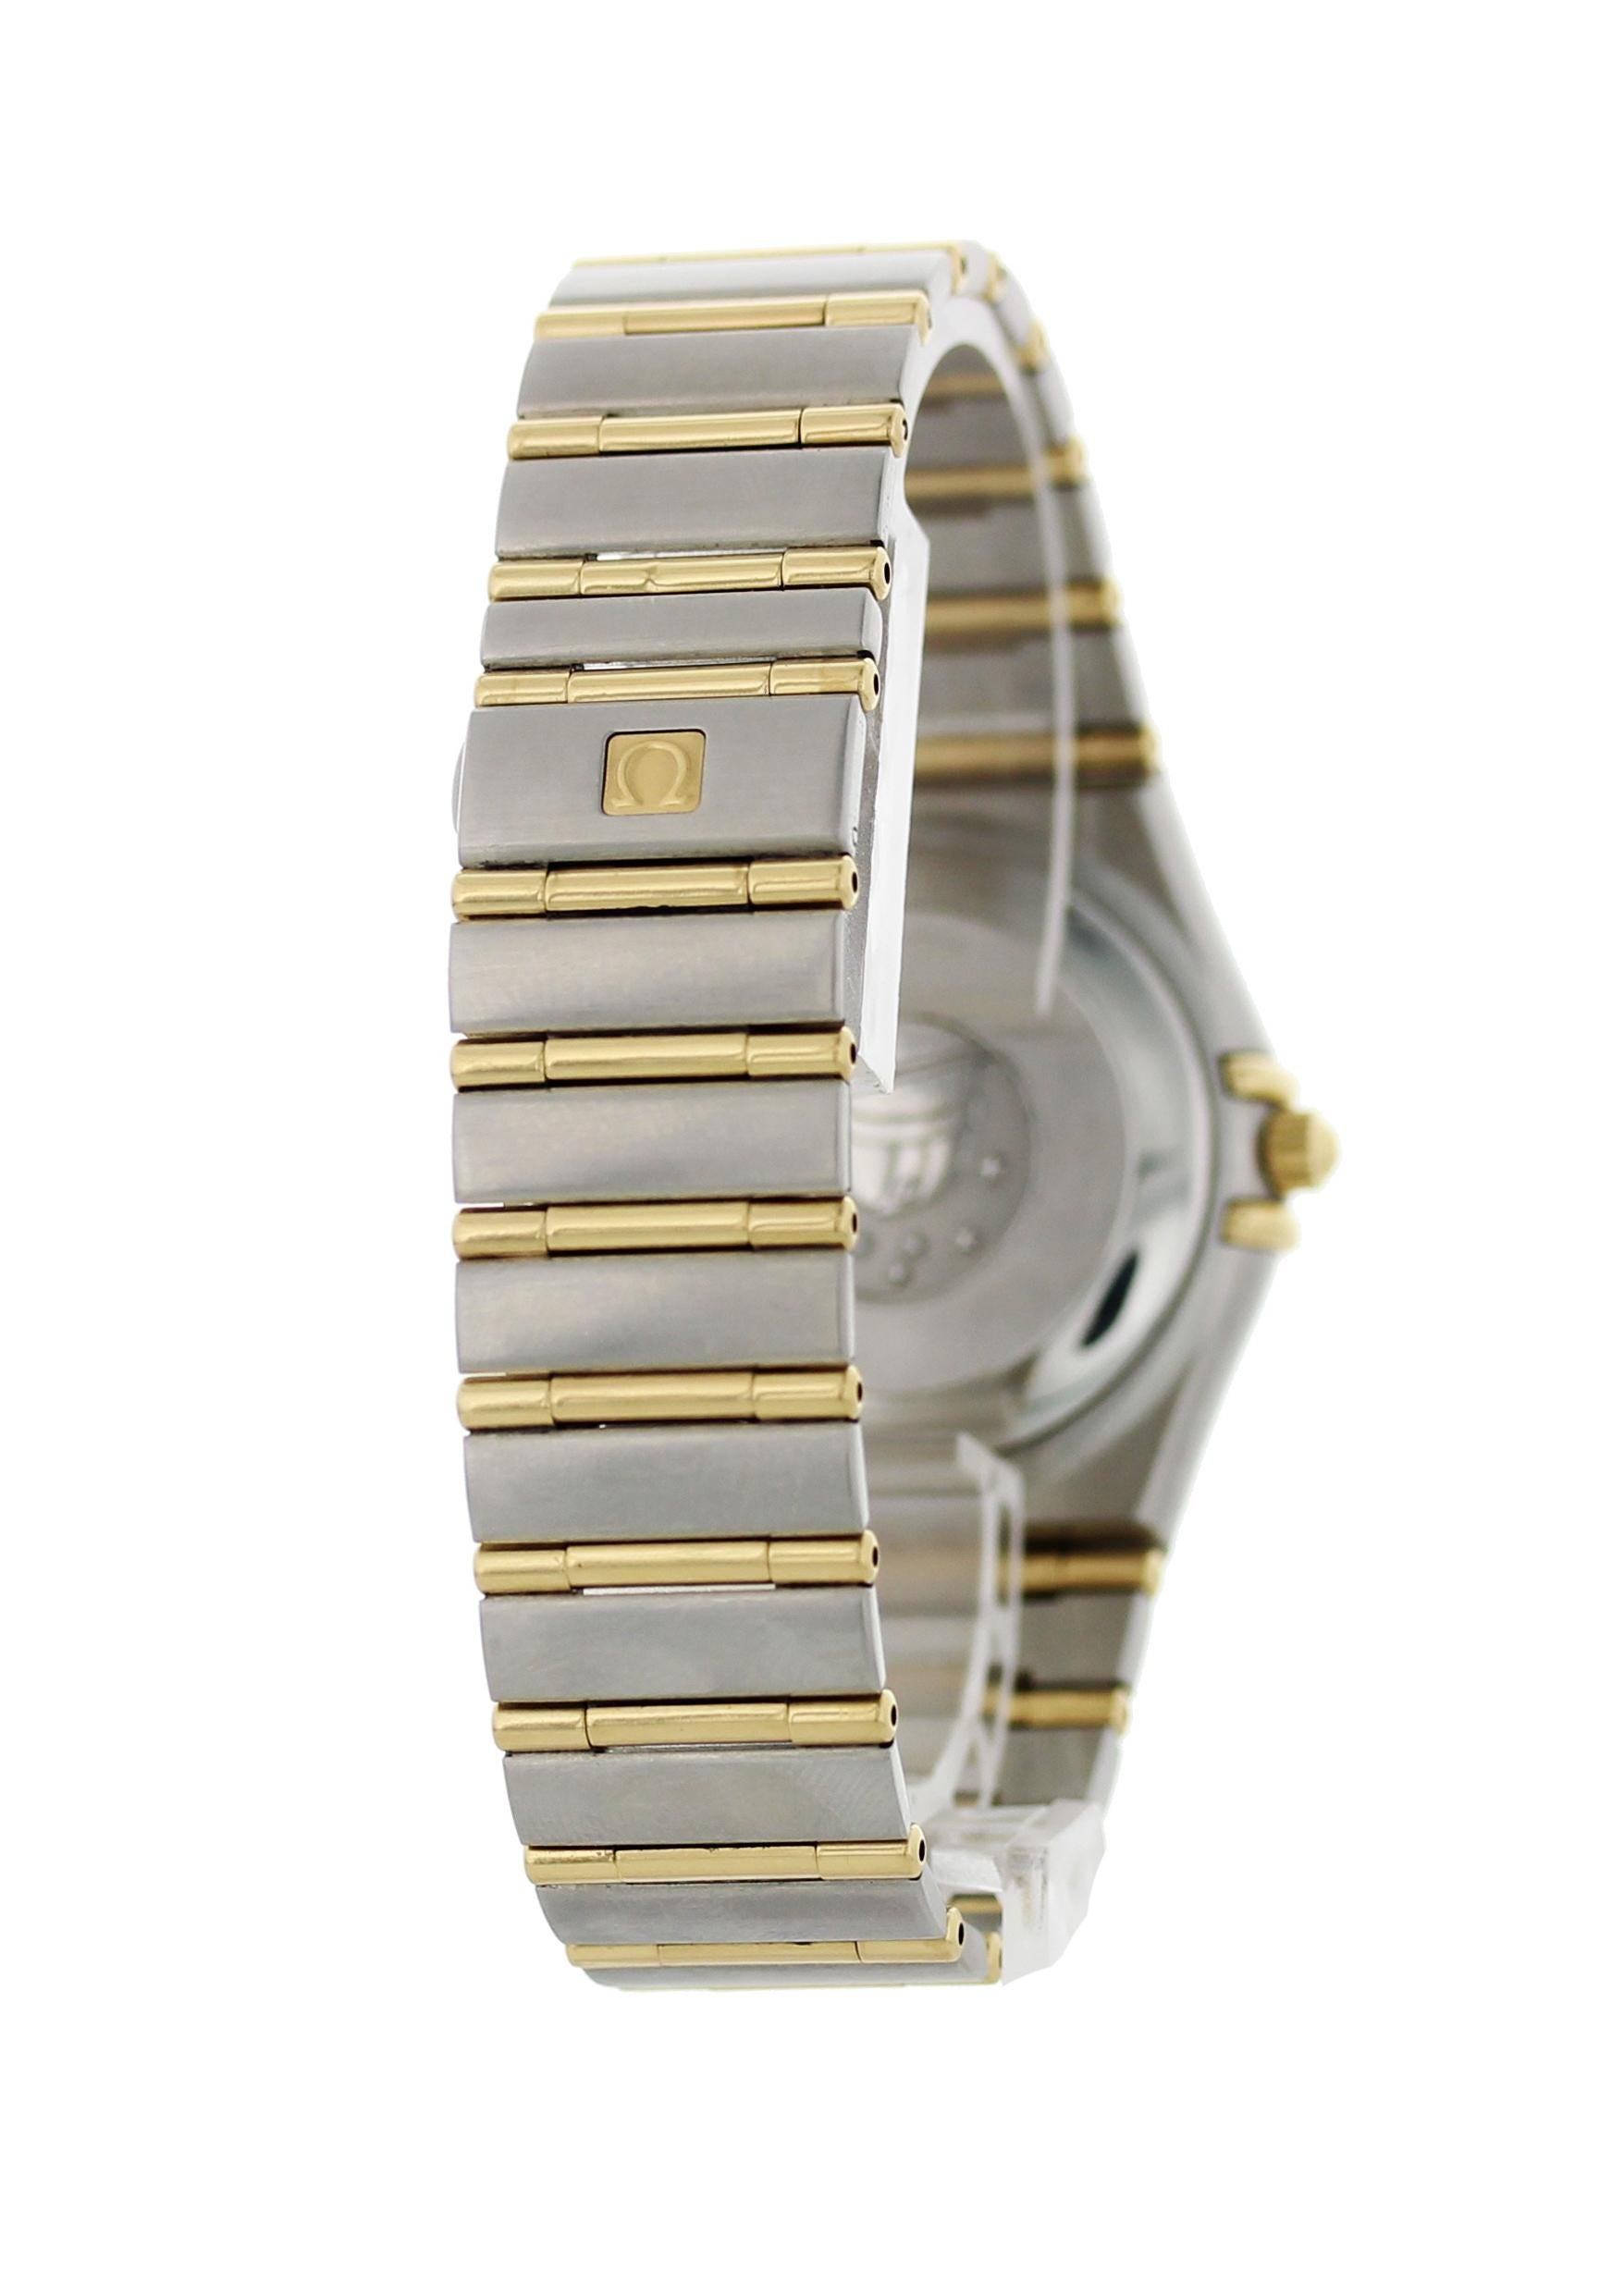 Omega Constellation 1202.10 Automatic with Omega Card Herren